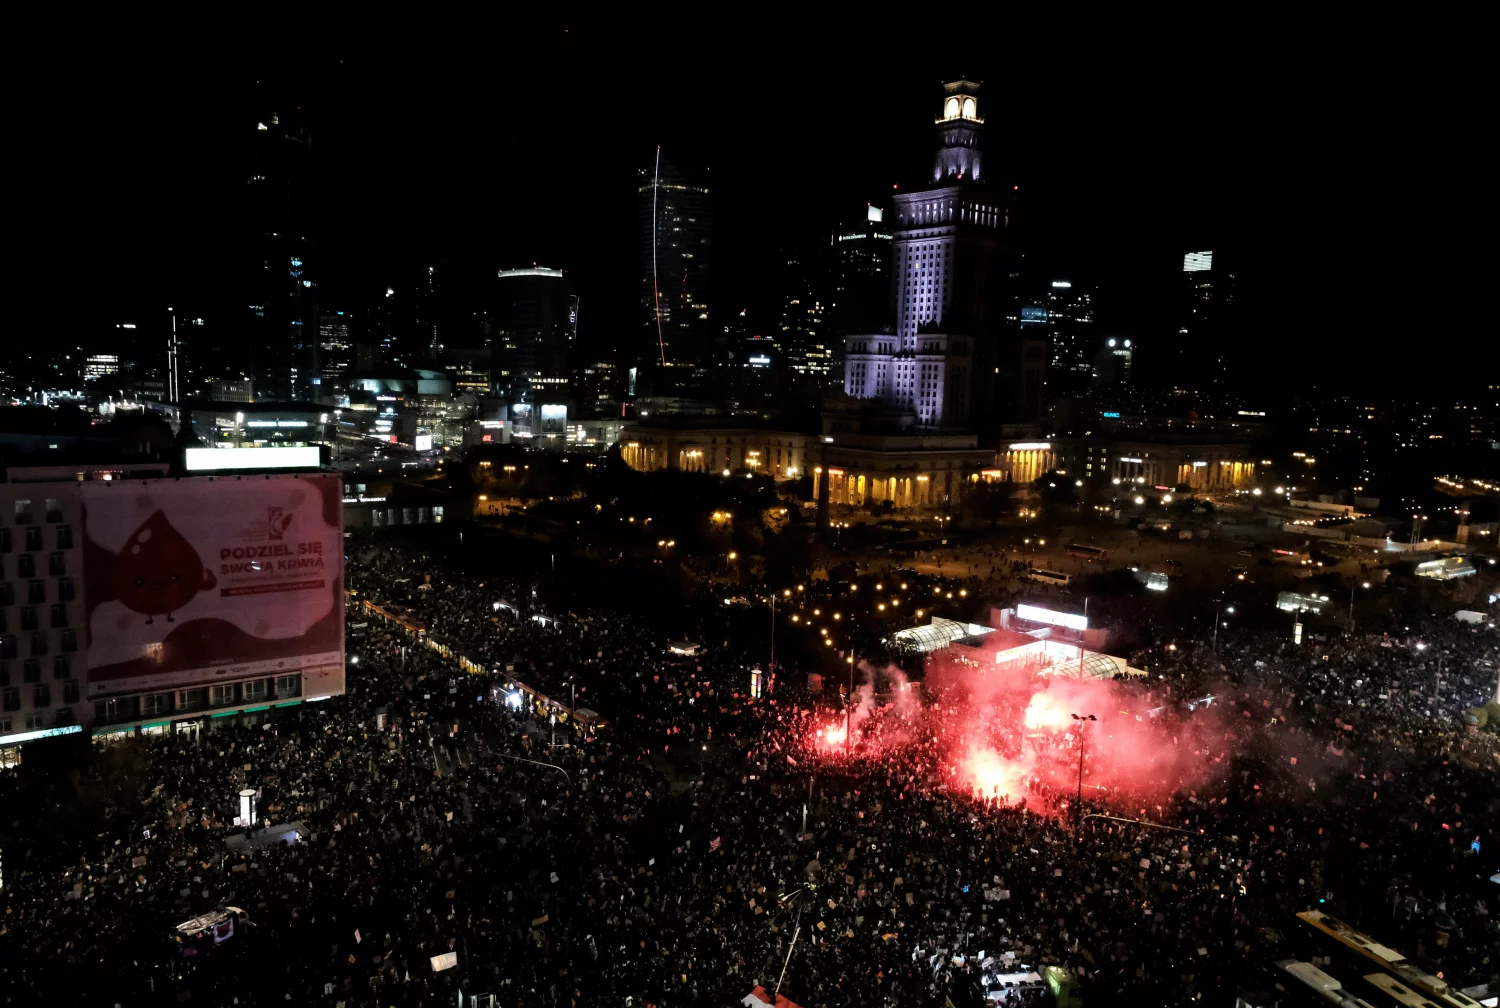 Drone view - Tens of thousands of people protest in the streets of Warsaw at night against the court verdict.